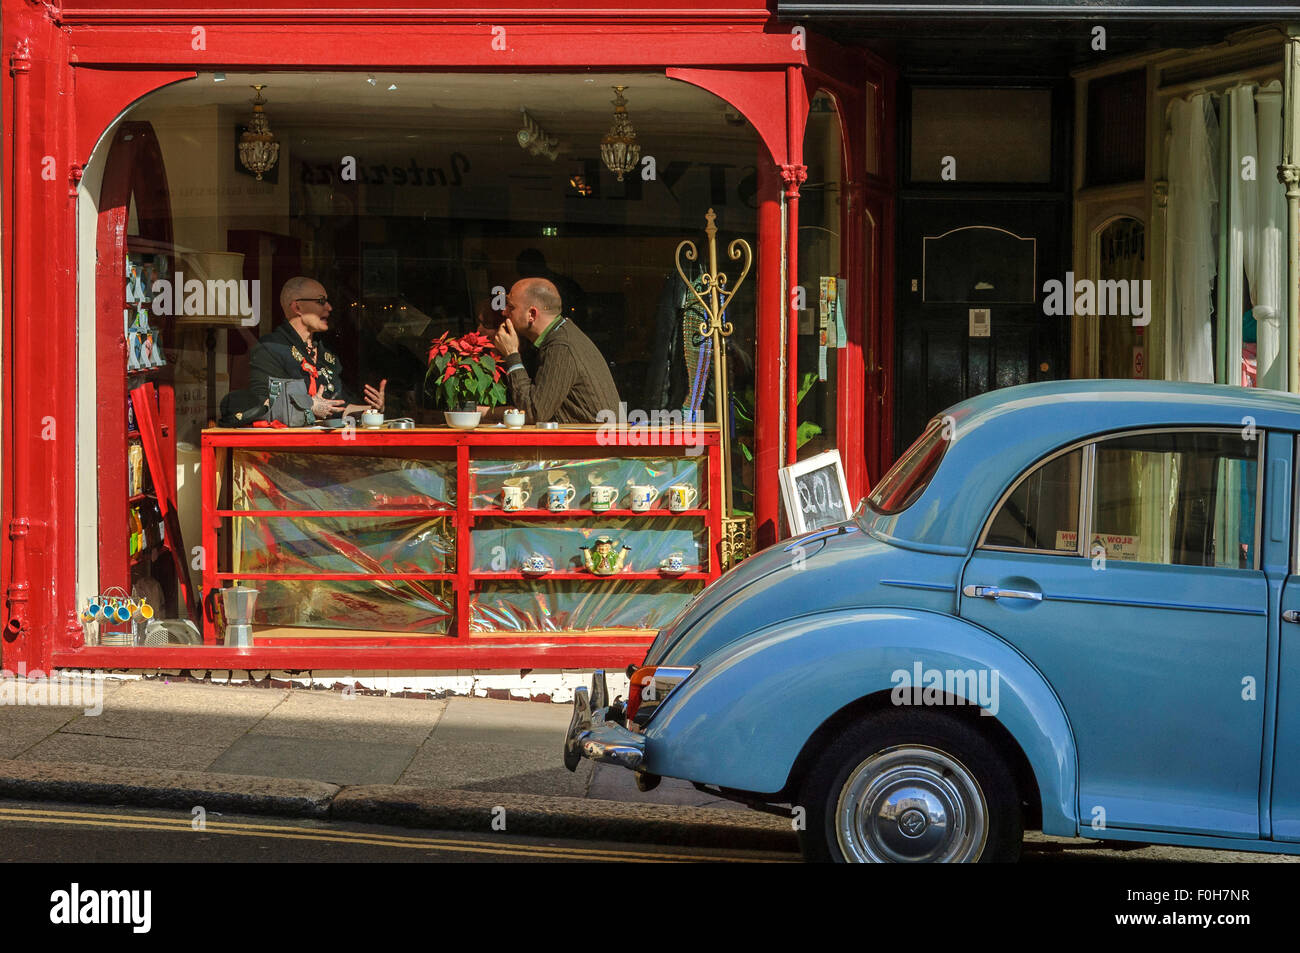 Cafe society. St Leonards on Sea. Hastings. East Sussex. UK Banque D'Images